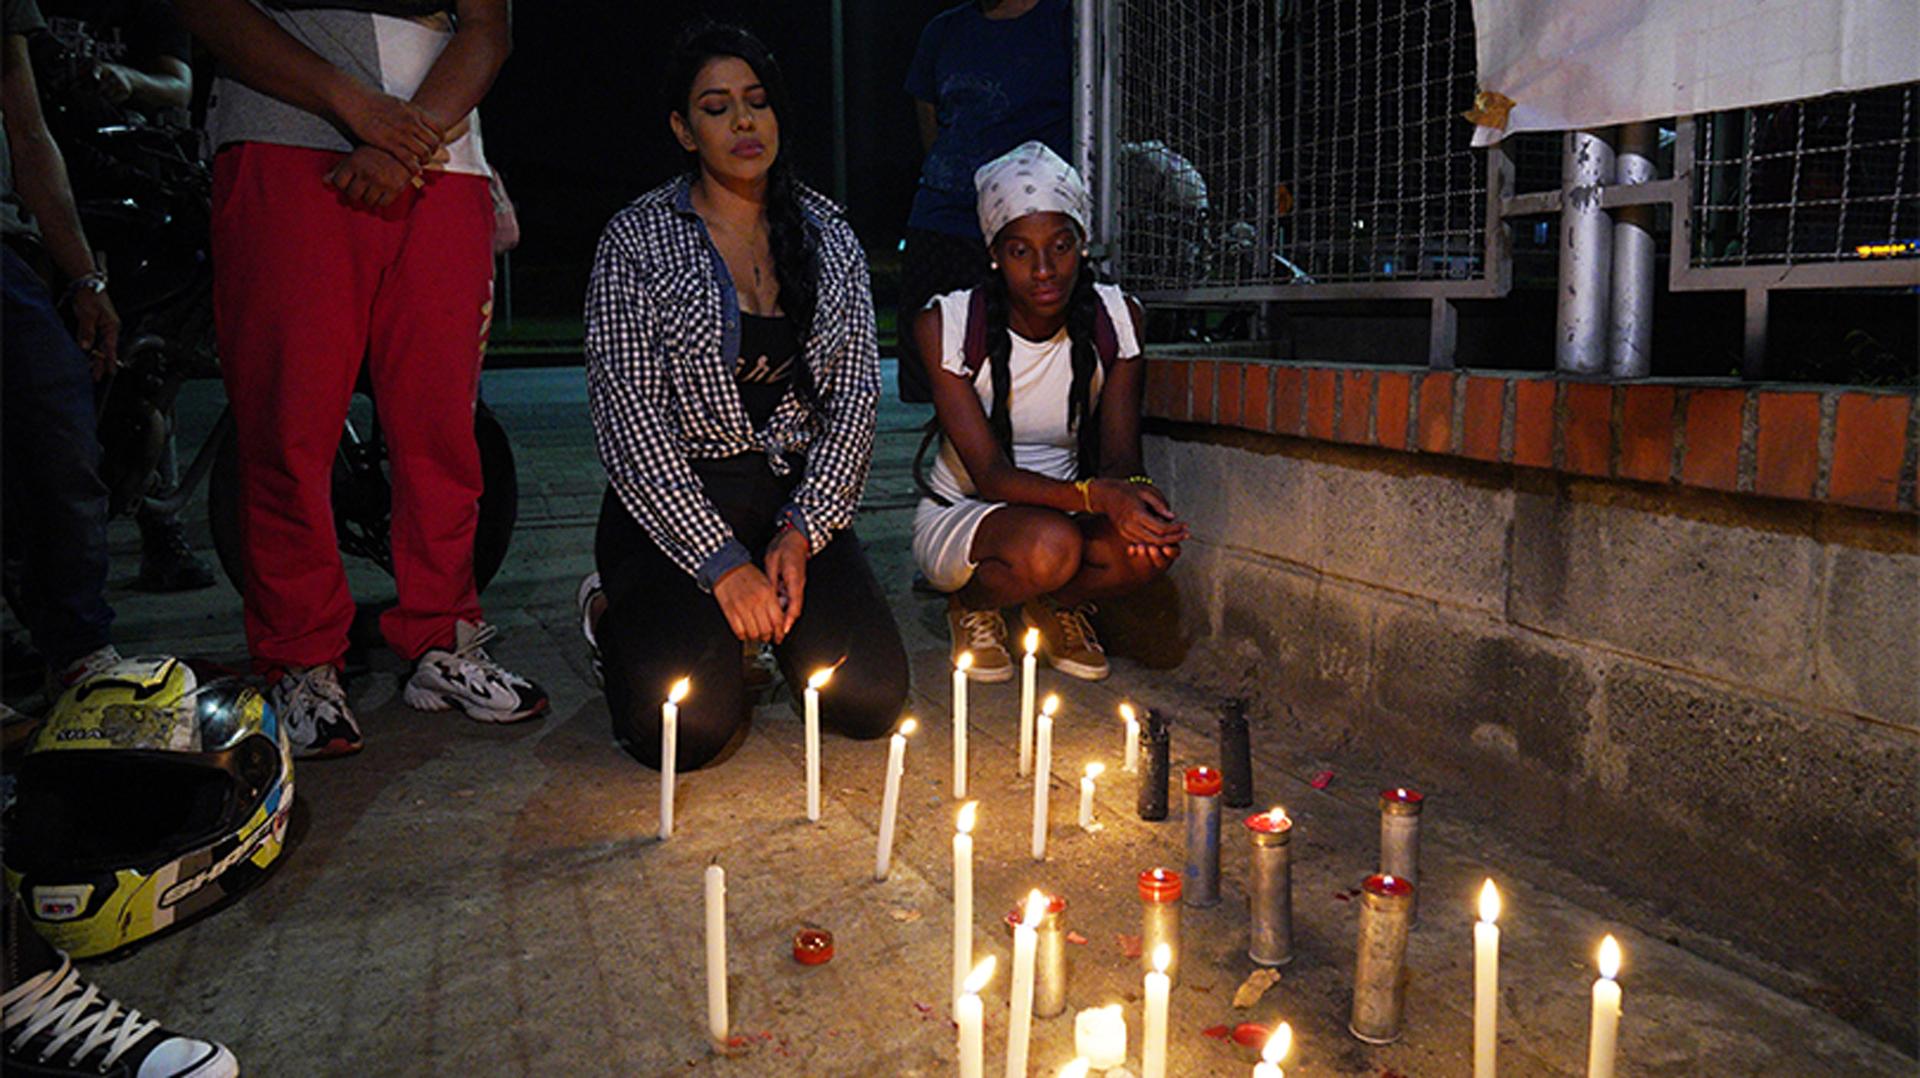 Friends and family of Nicolas Guerrero lit candles near the spot where he was killed during a protest